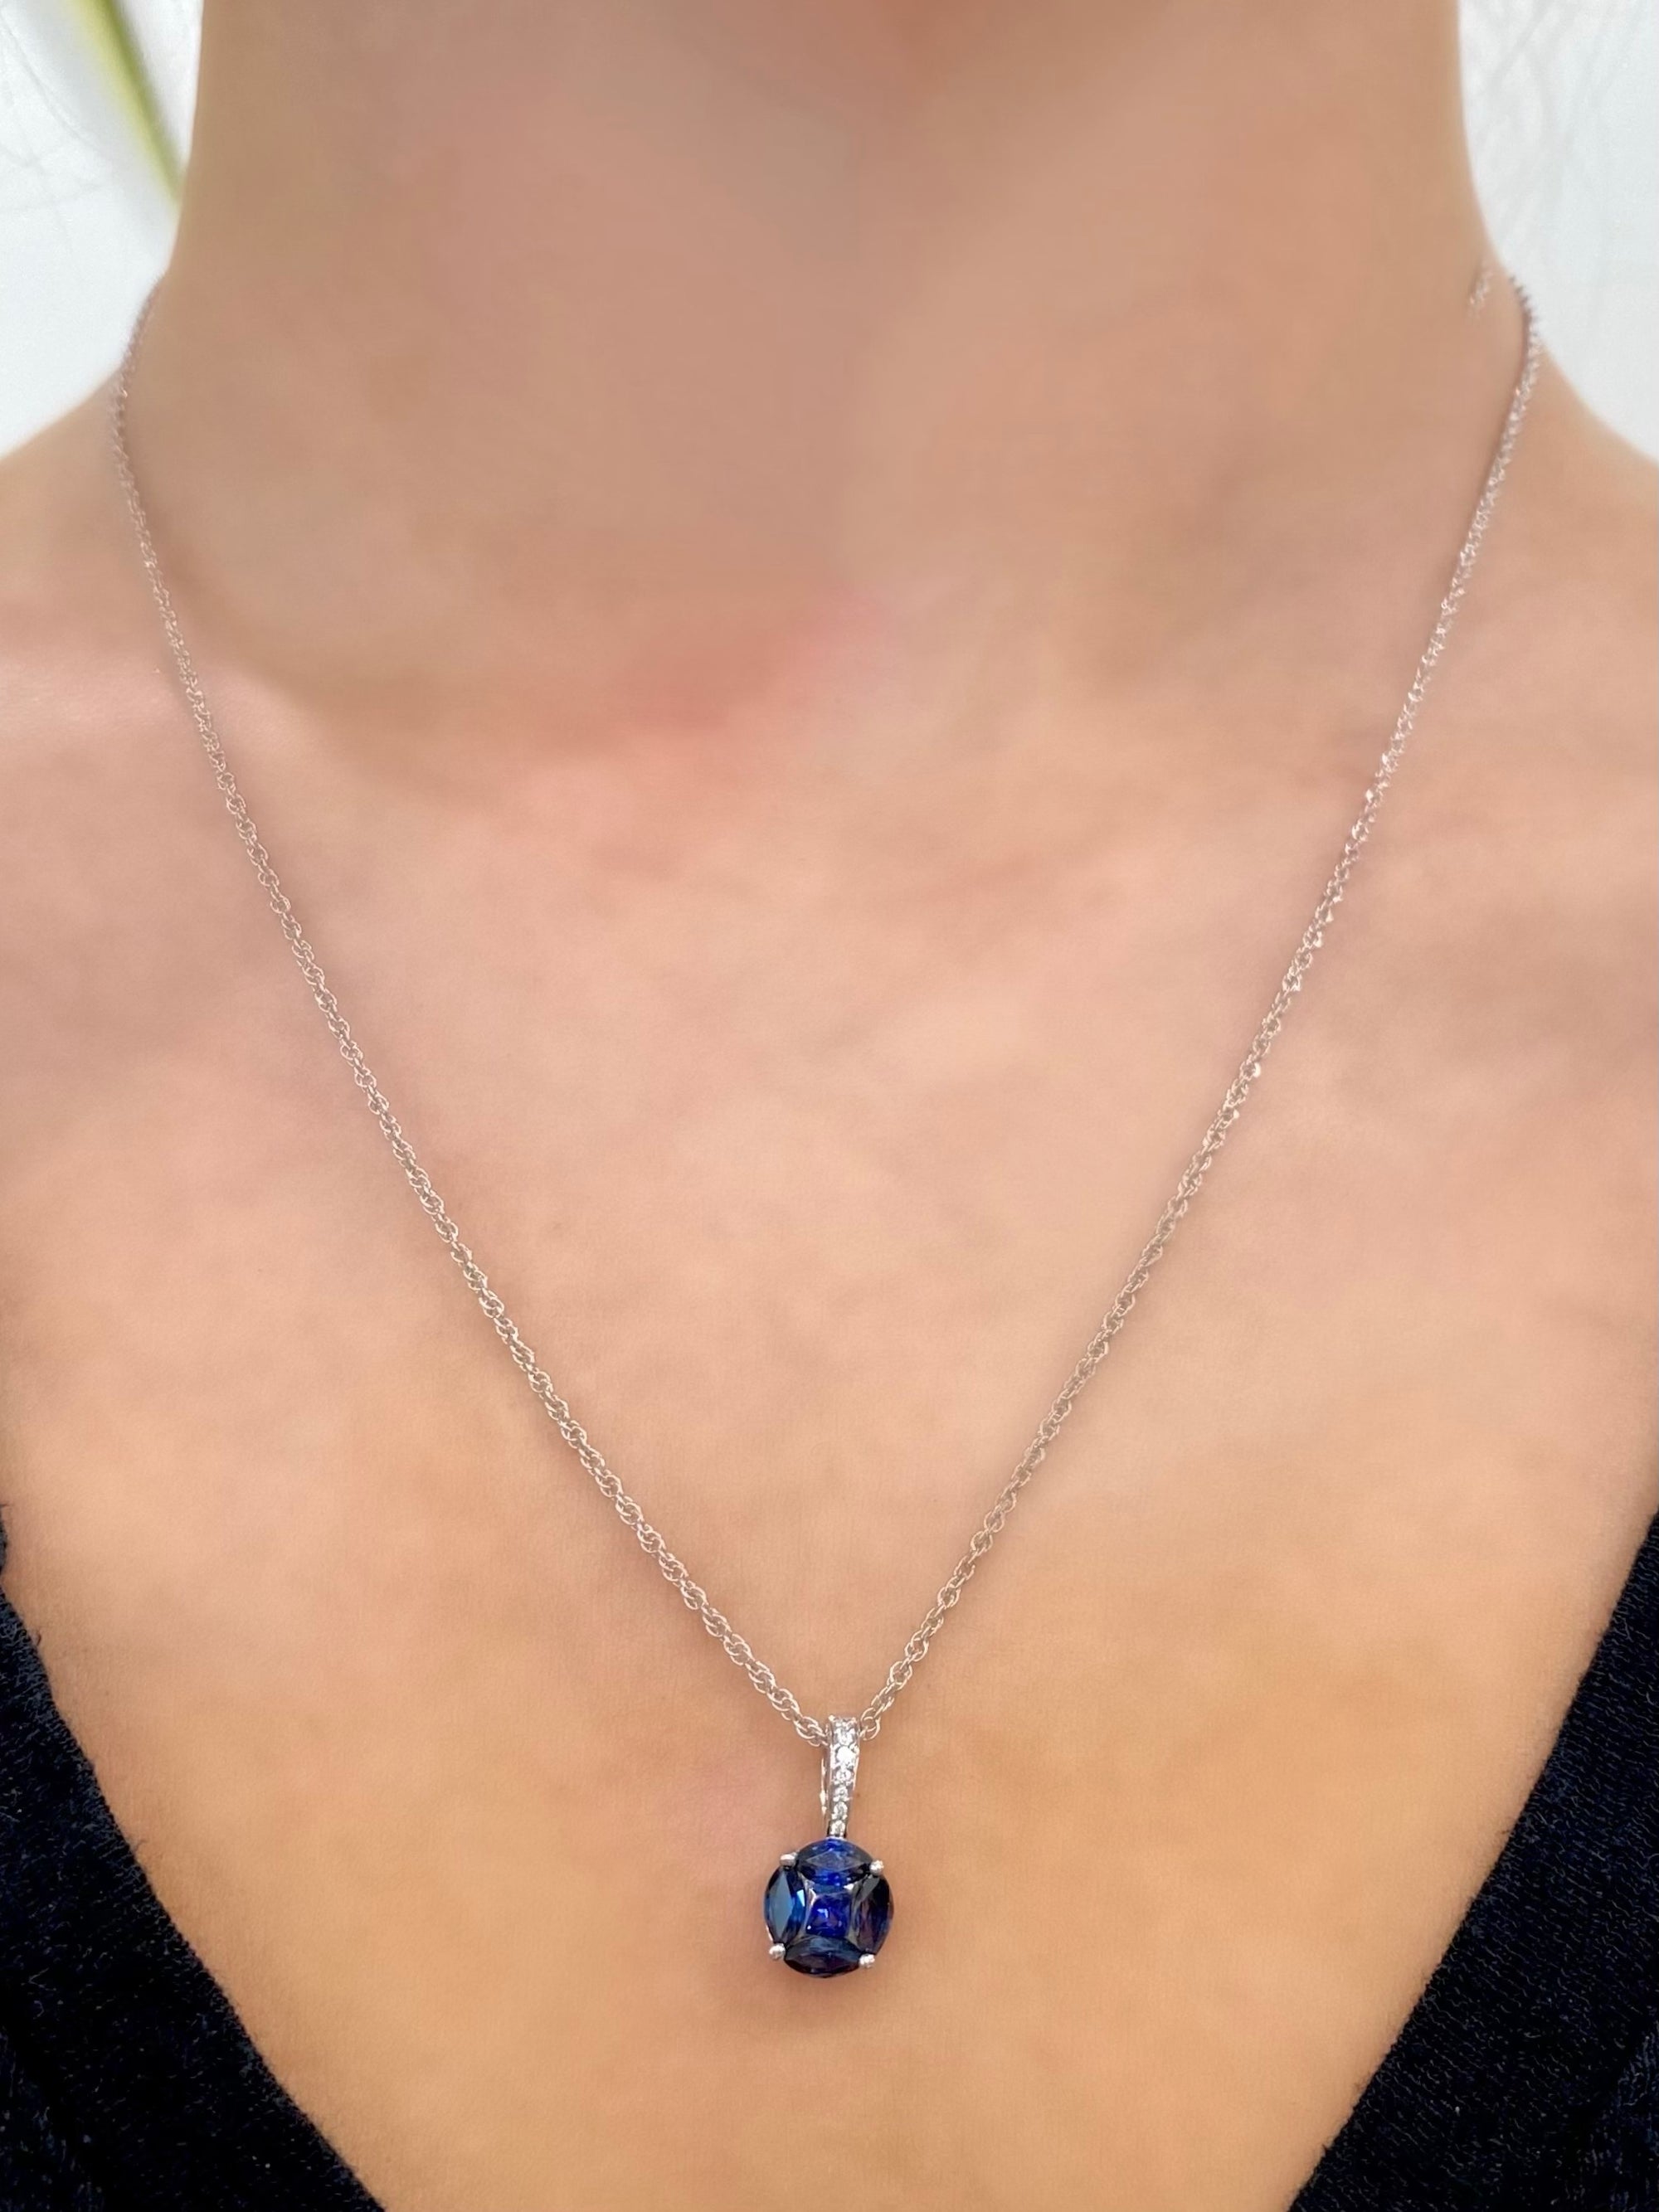 Blue Sapphire and Diamond Felicity Necklace